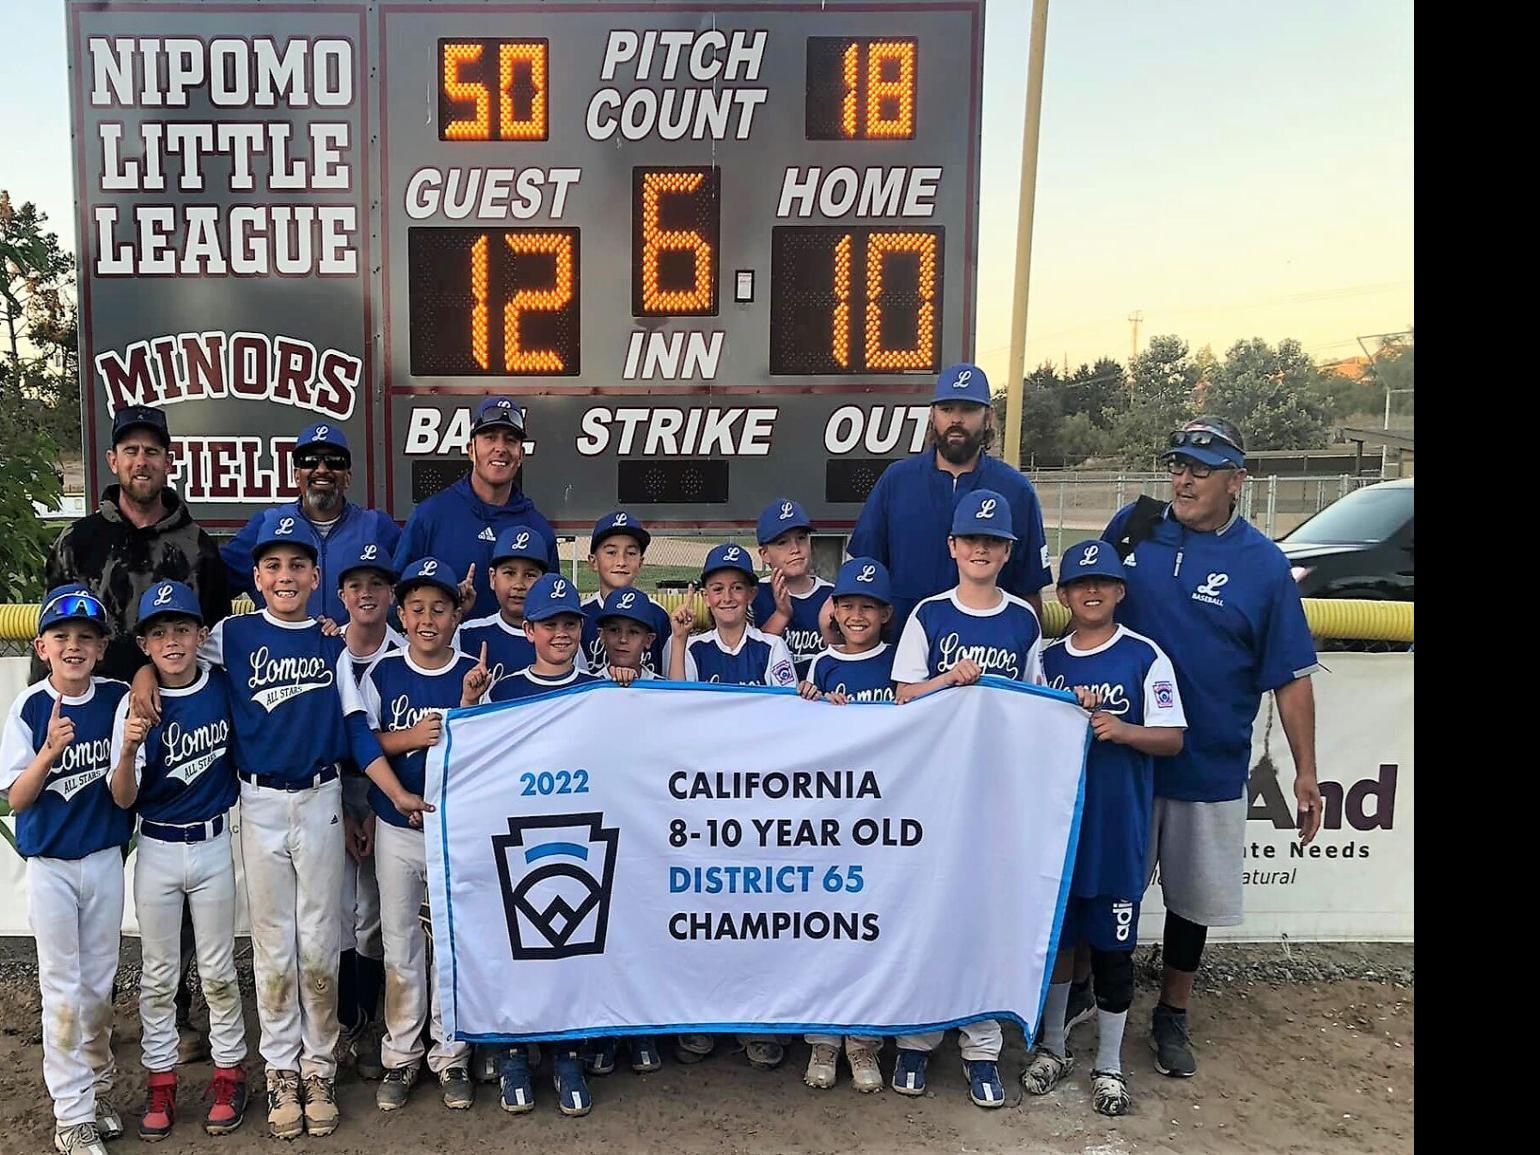 Orcutt National Dodgers win Orcutt championship